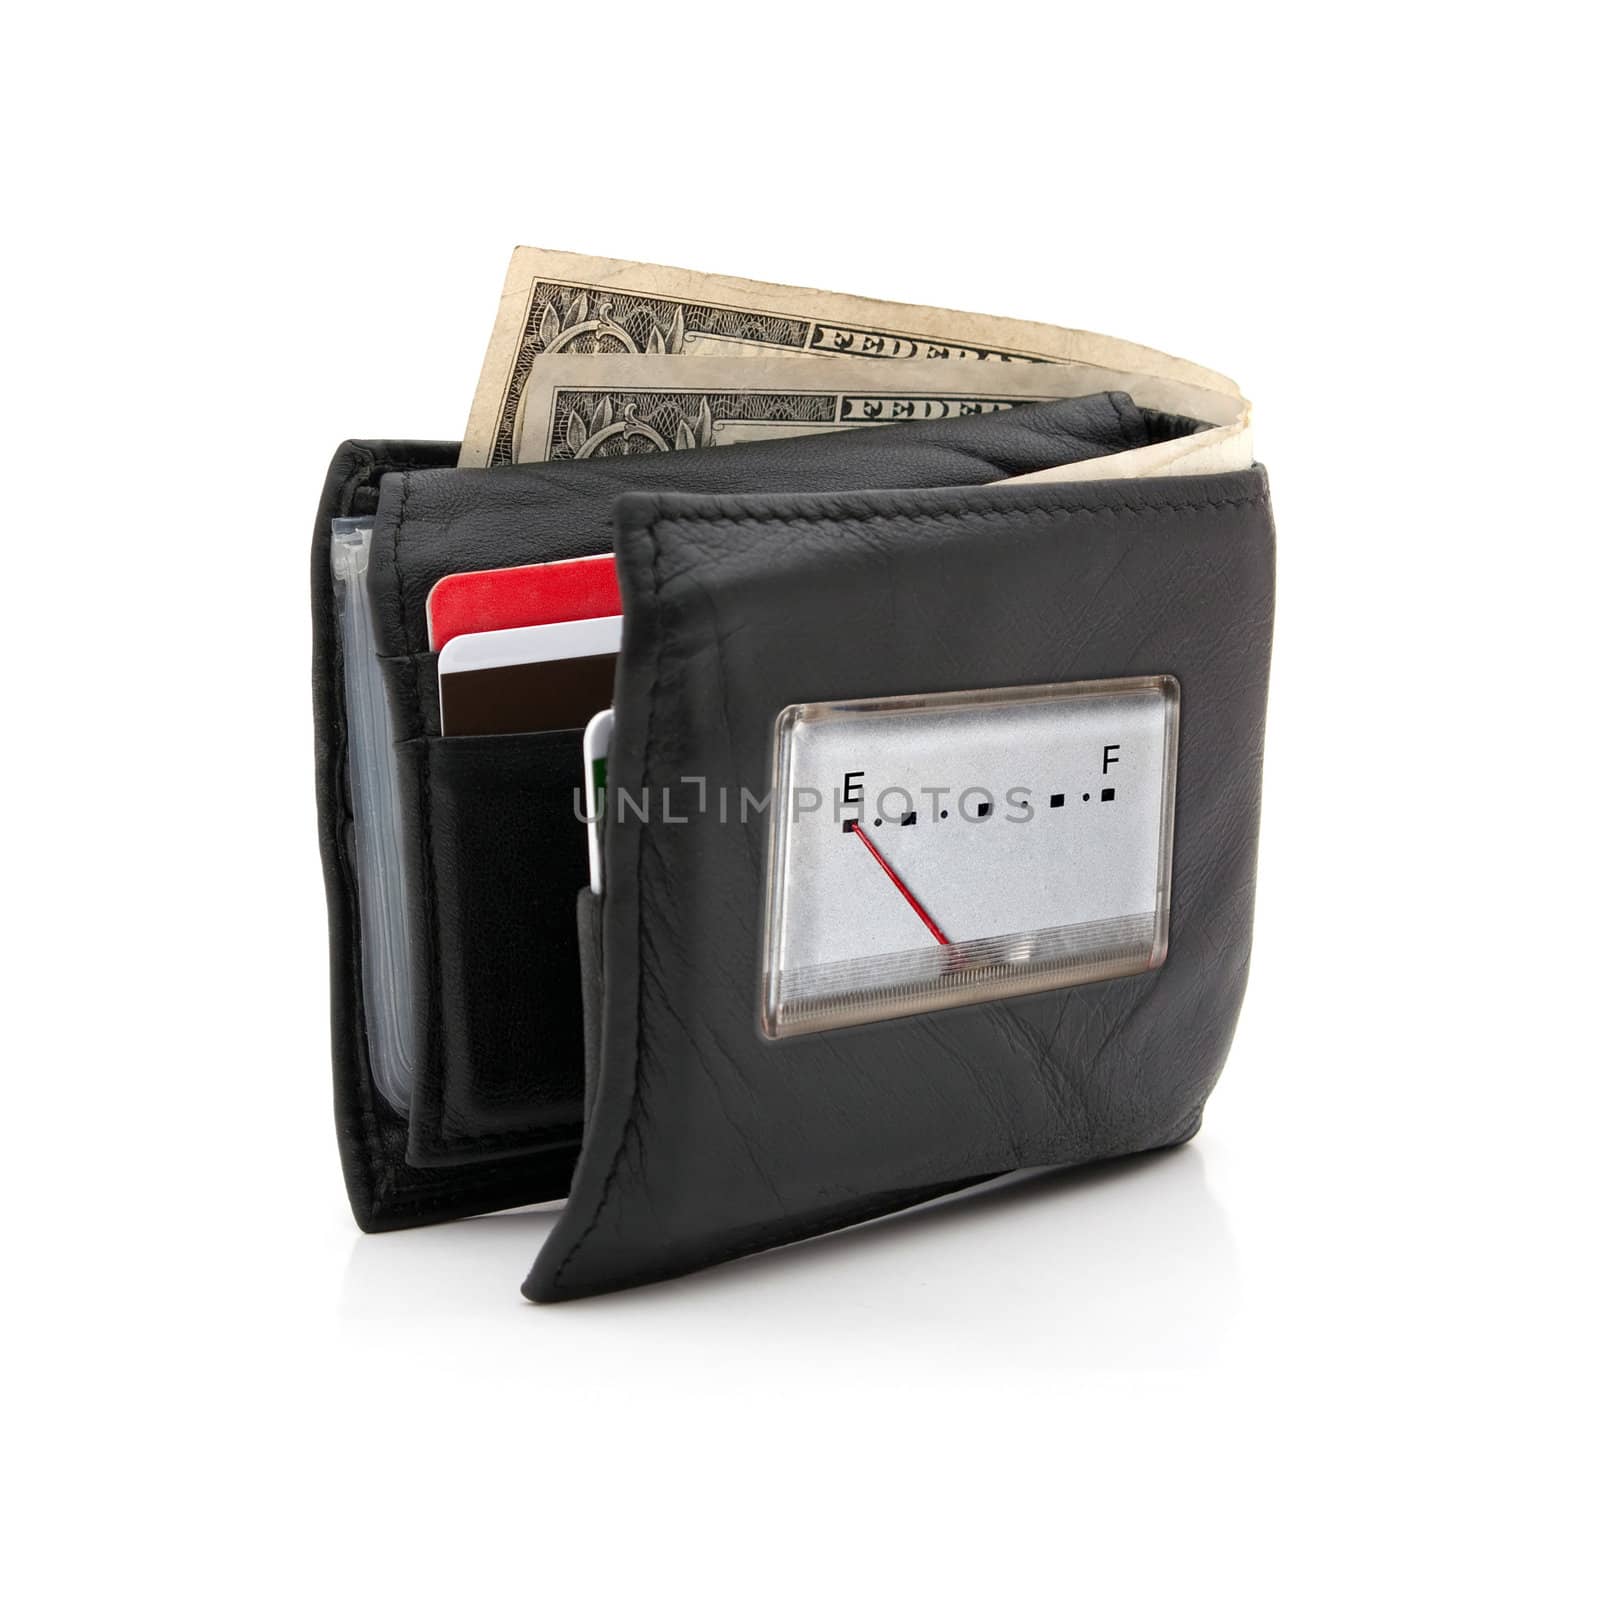 A black leather wallet with only two dollars left has a gauge on it with the needle pointing to E for empty.